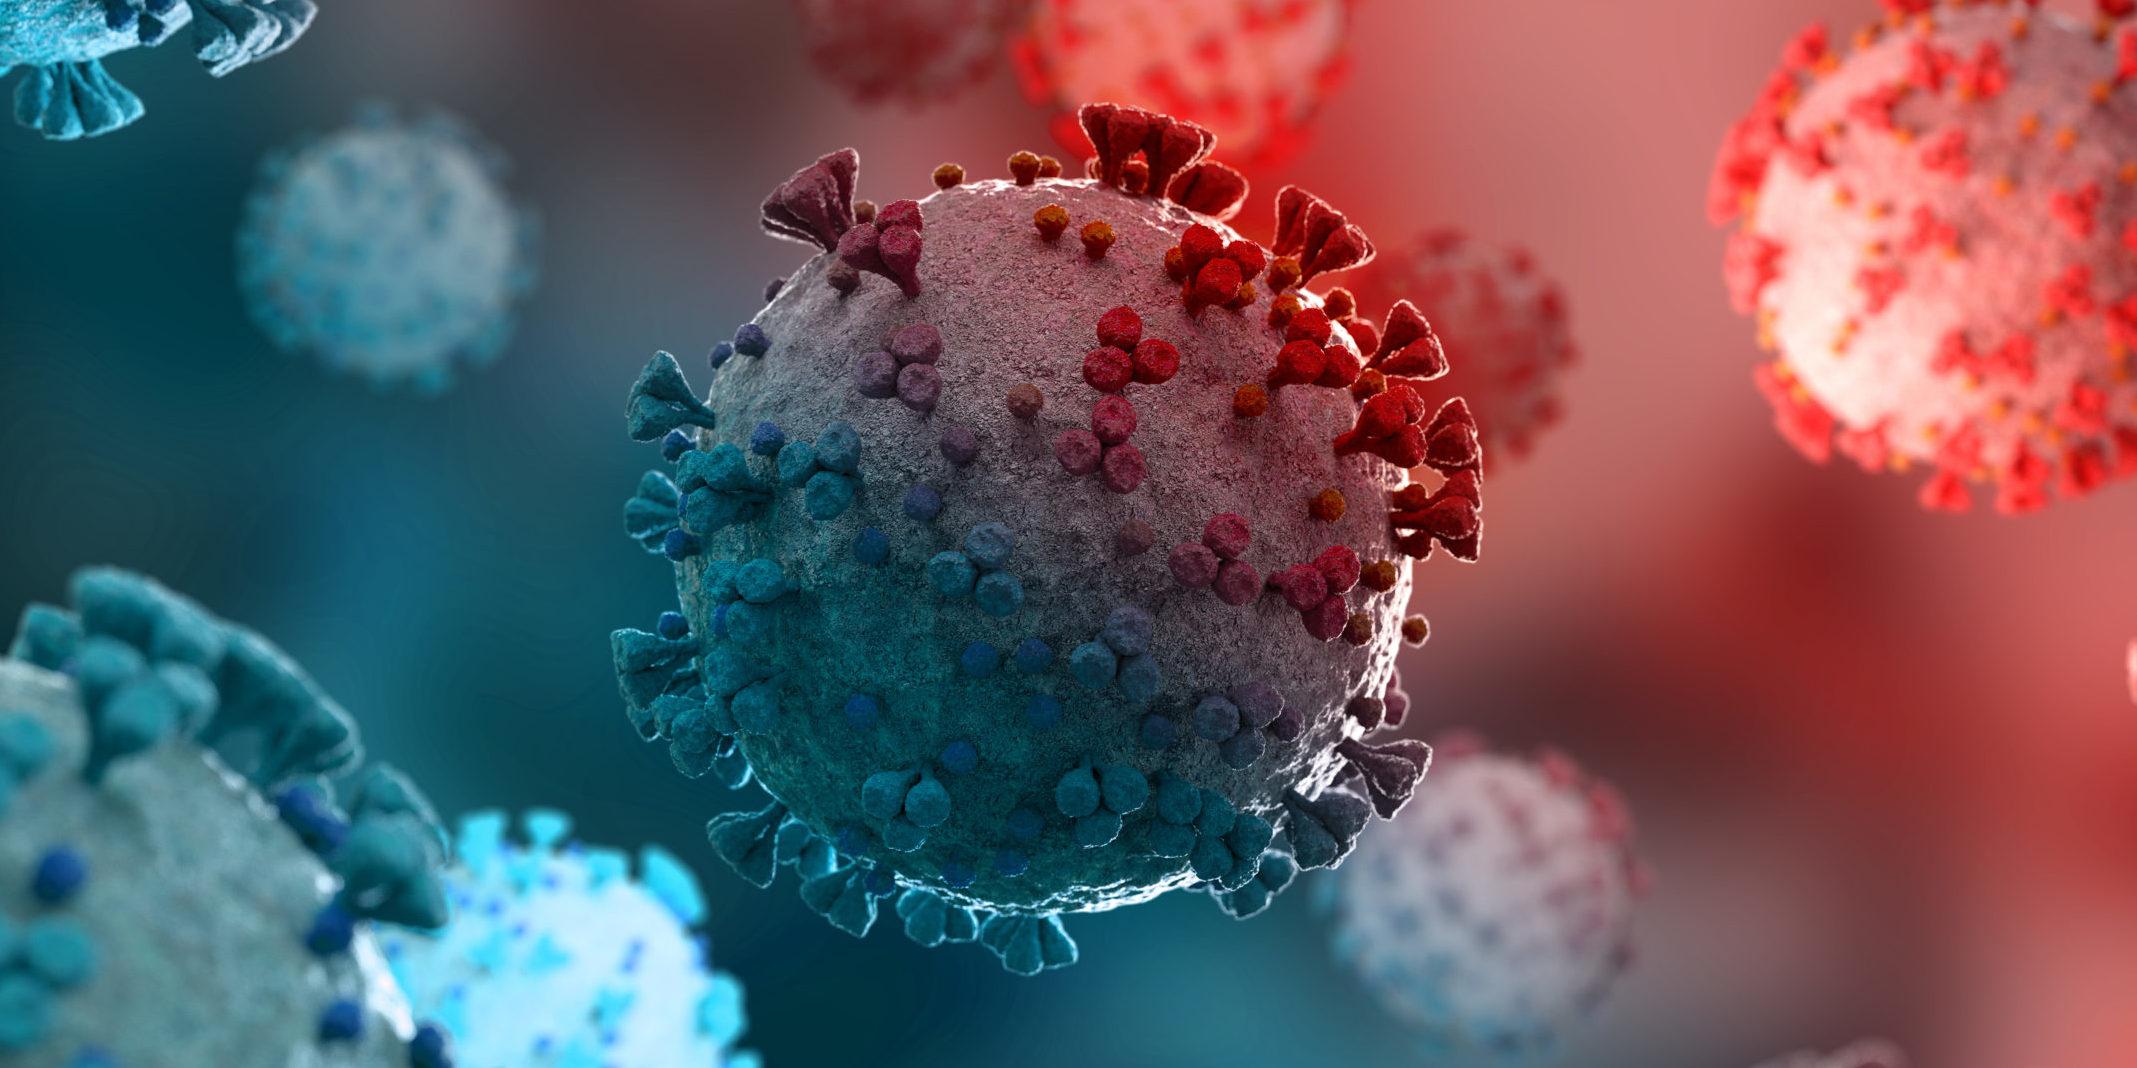 Microscopic Close Up Of The Covid 19 Disease. Coronavirus Illness Spreading In Body Cell. 2019 NCoV Analysis On Microscope Level 3D Rendering